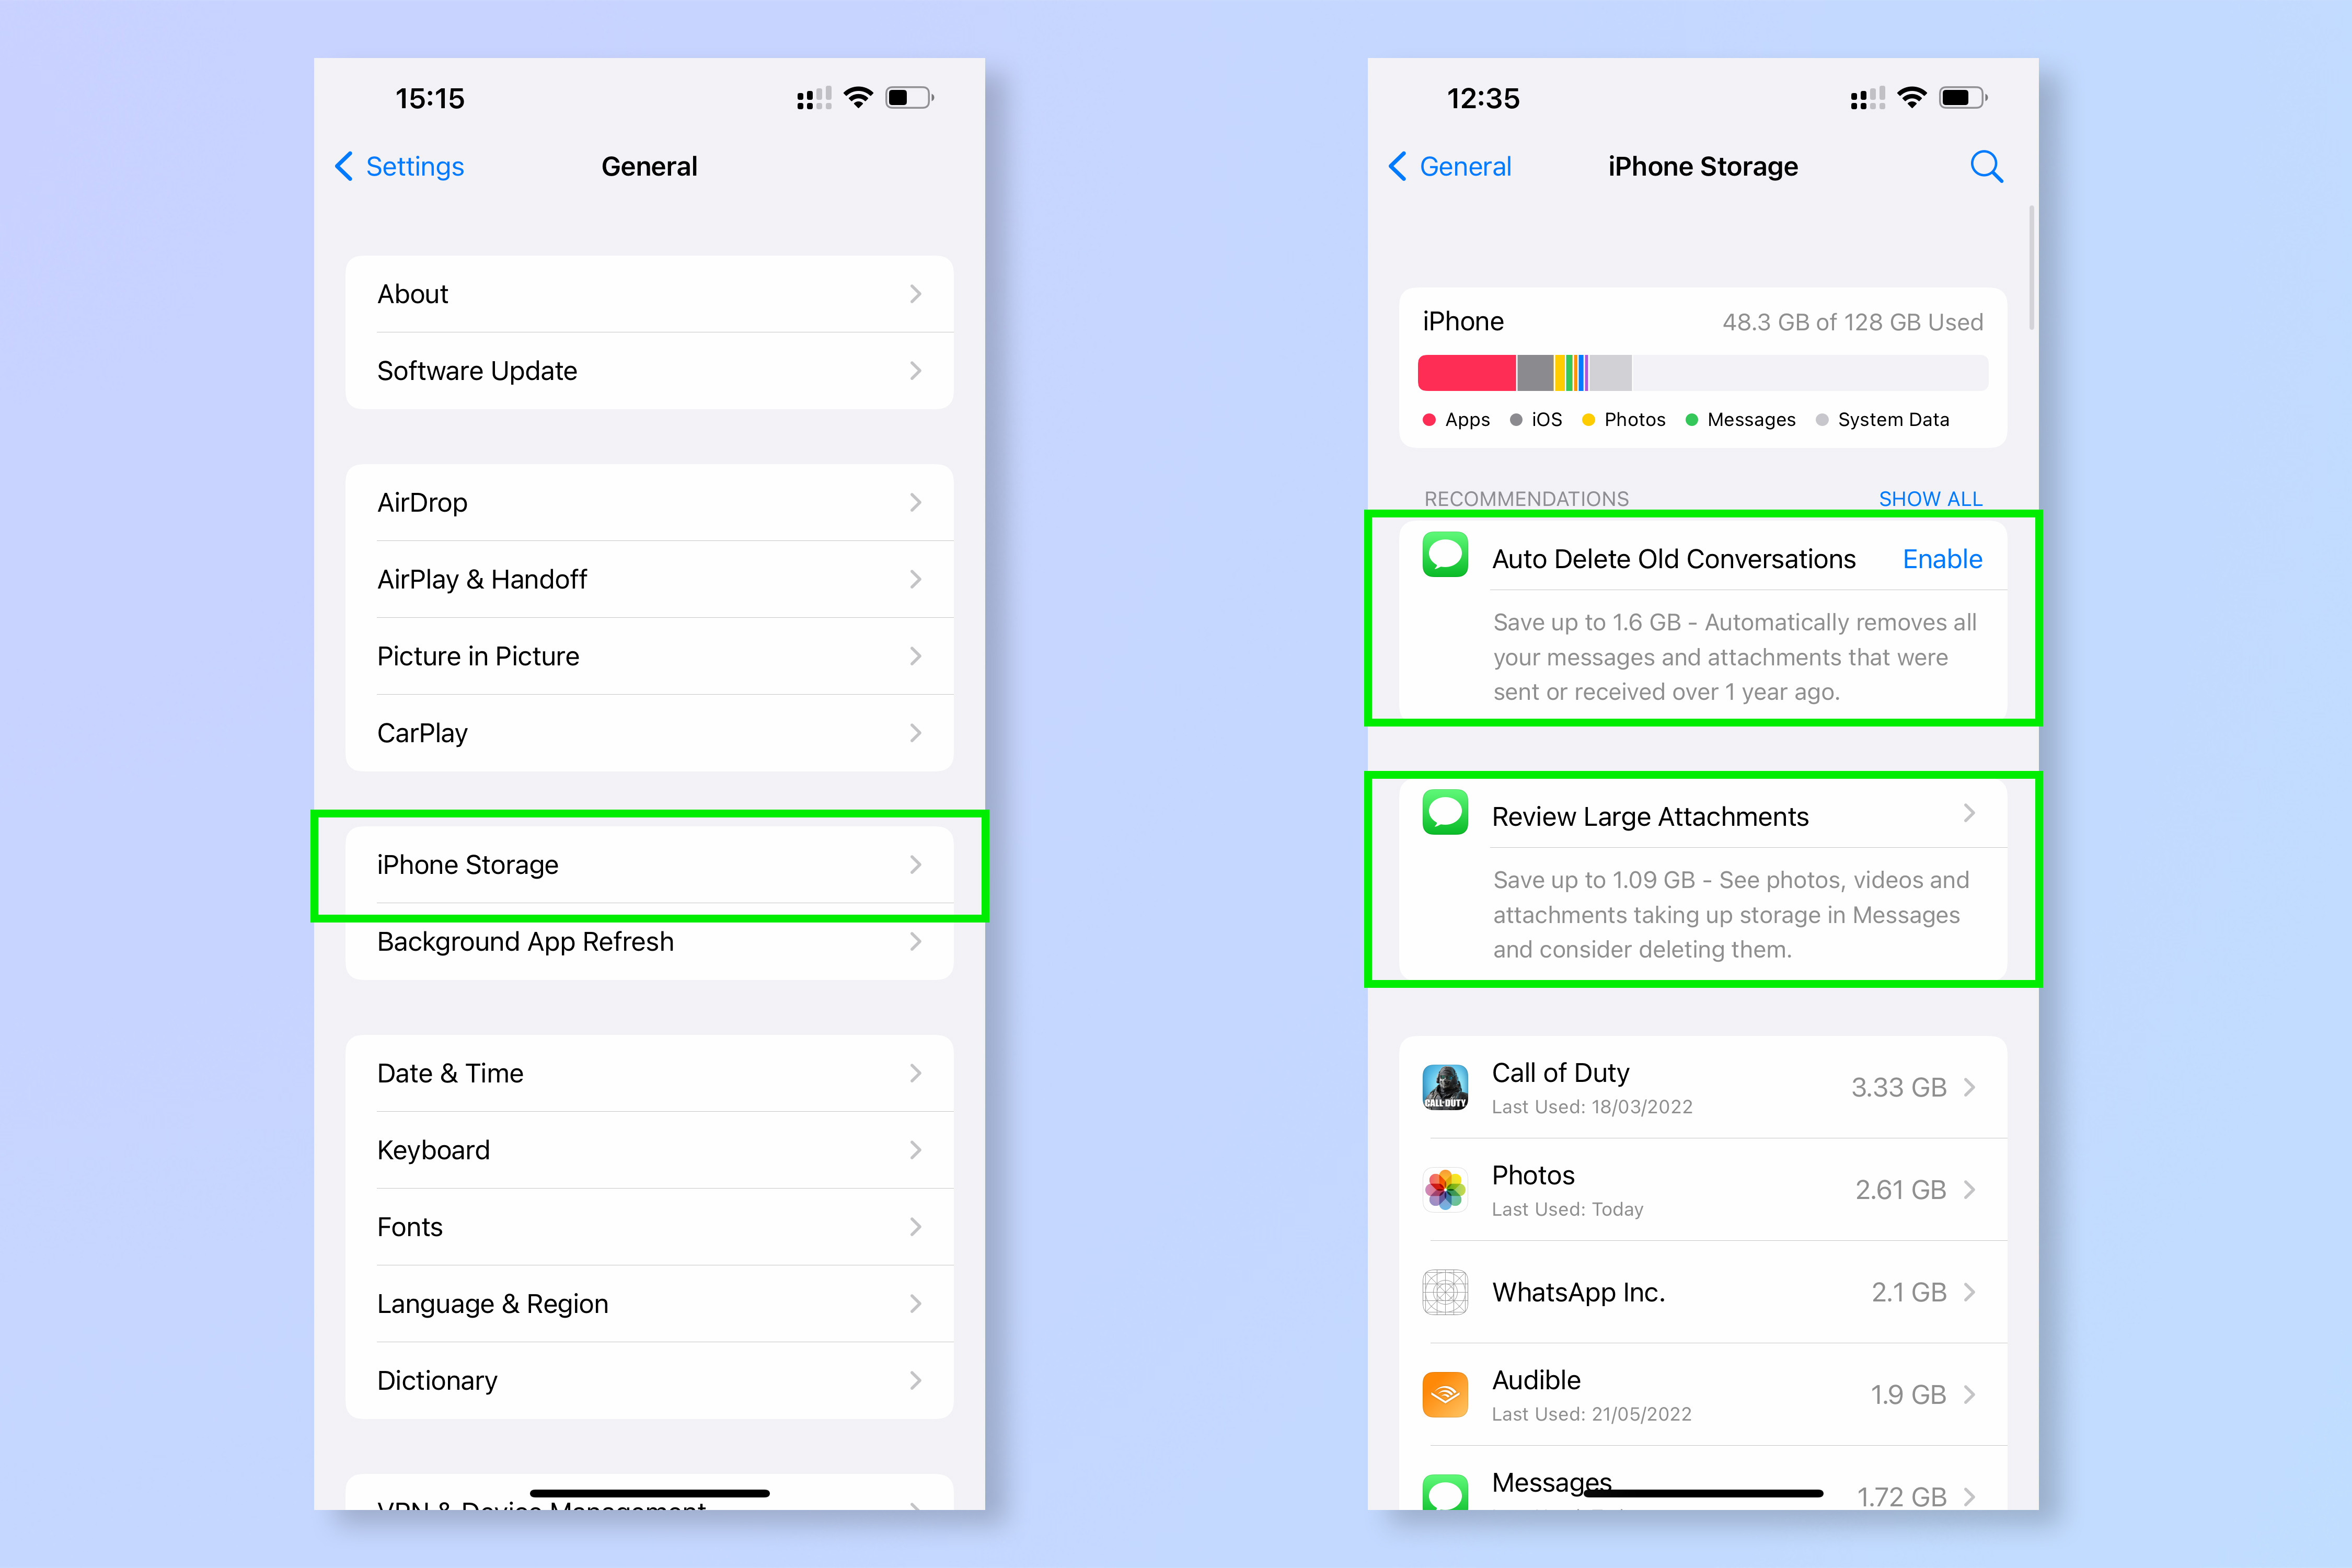 Screenshots showing the steps for freeing up storage on iPhone